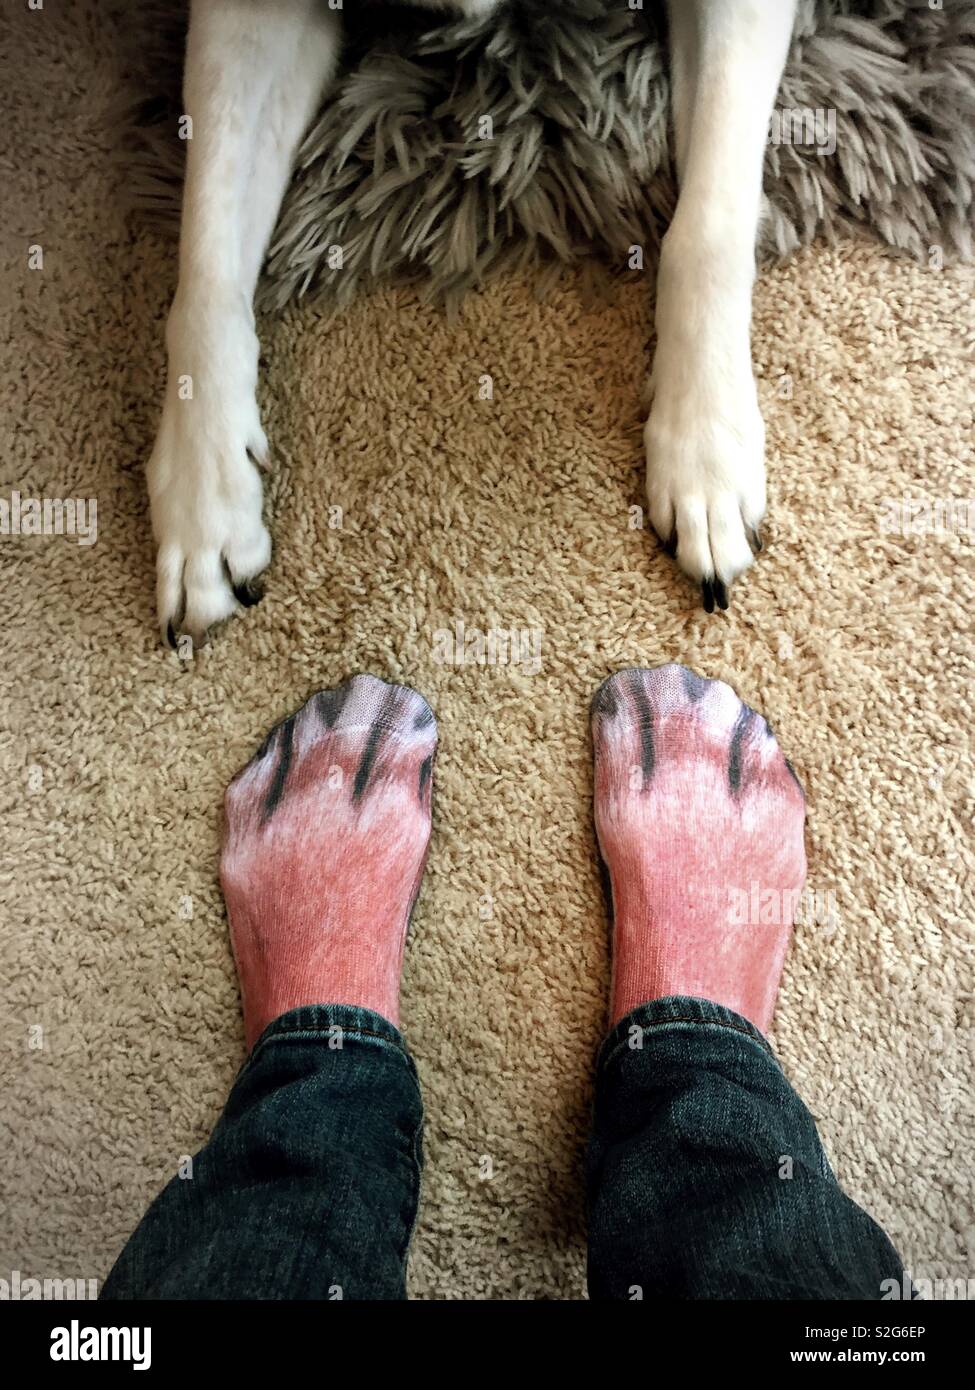 A person wearing dog paw socks and a real dog's paws Stock Photo - Alamy